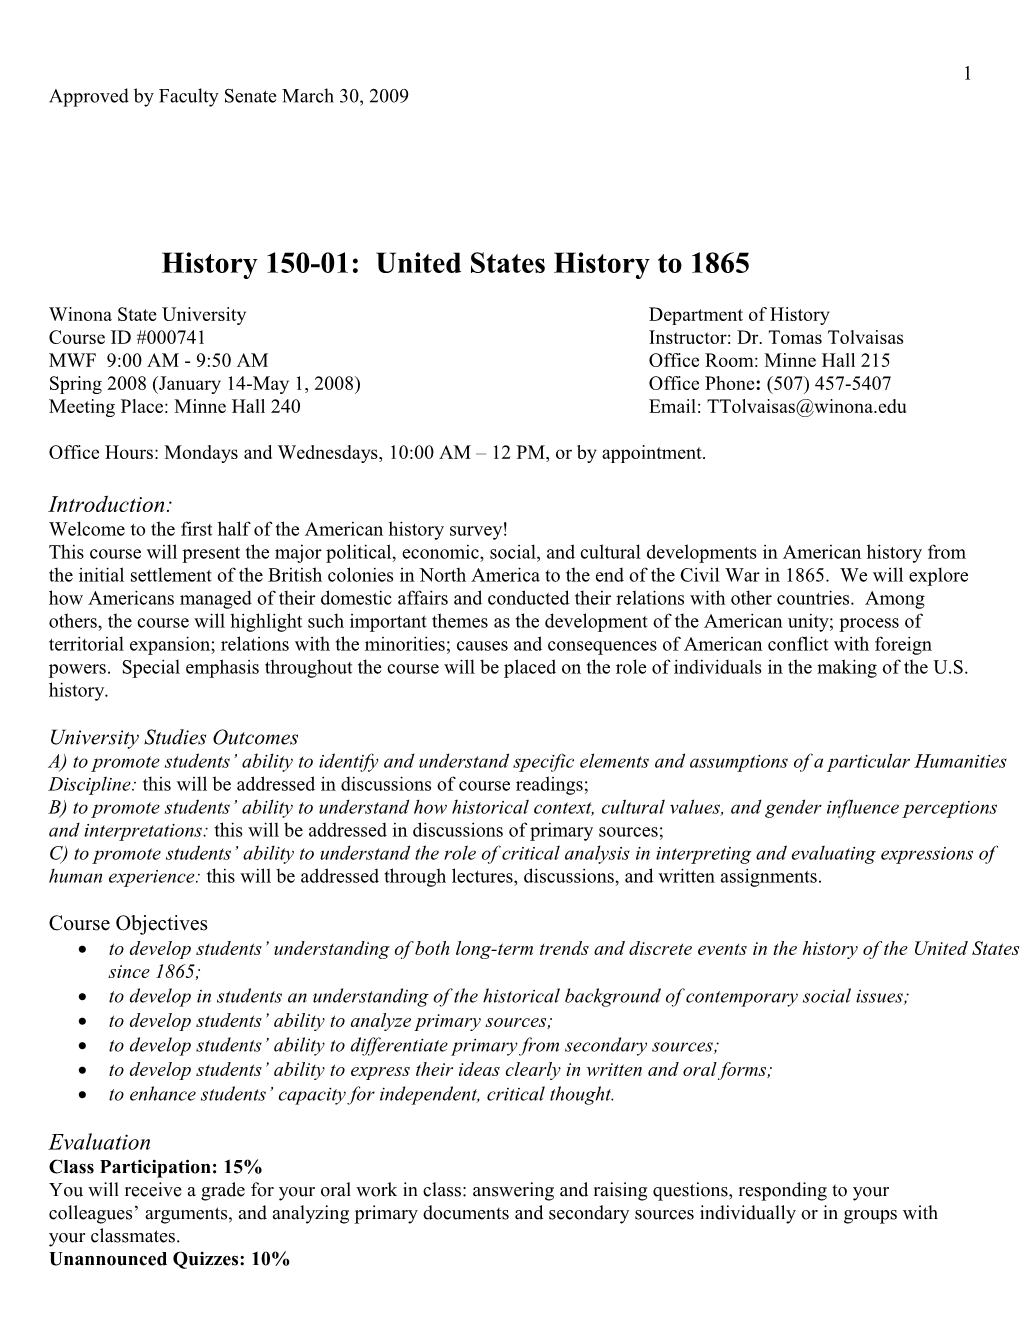 History 150-01: United States History to 1865